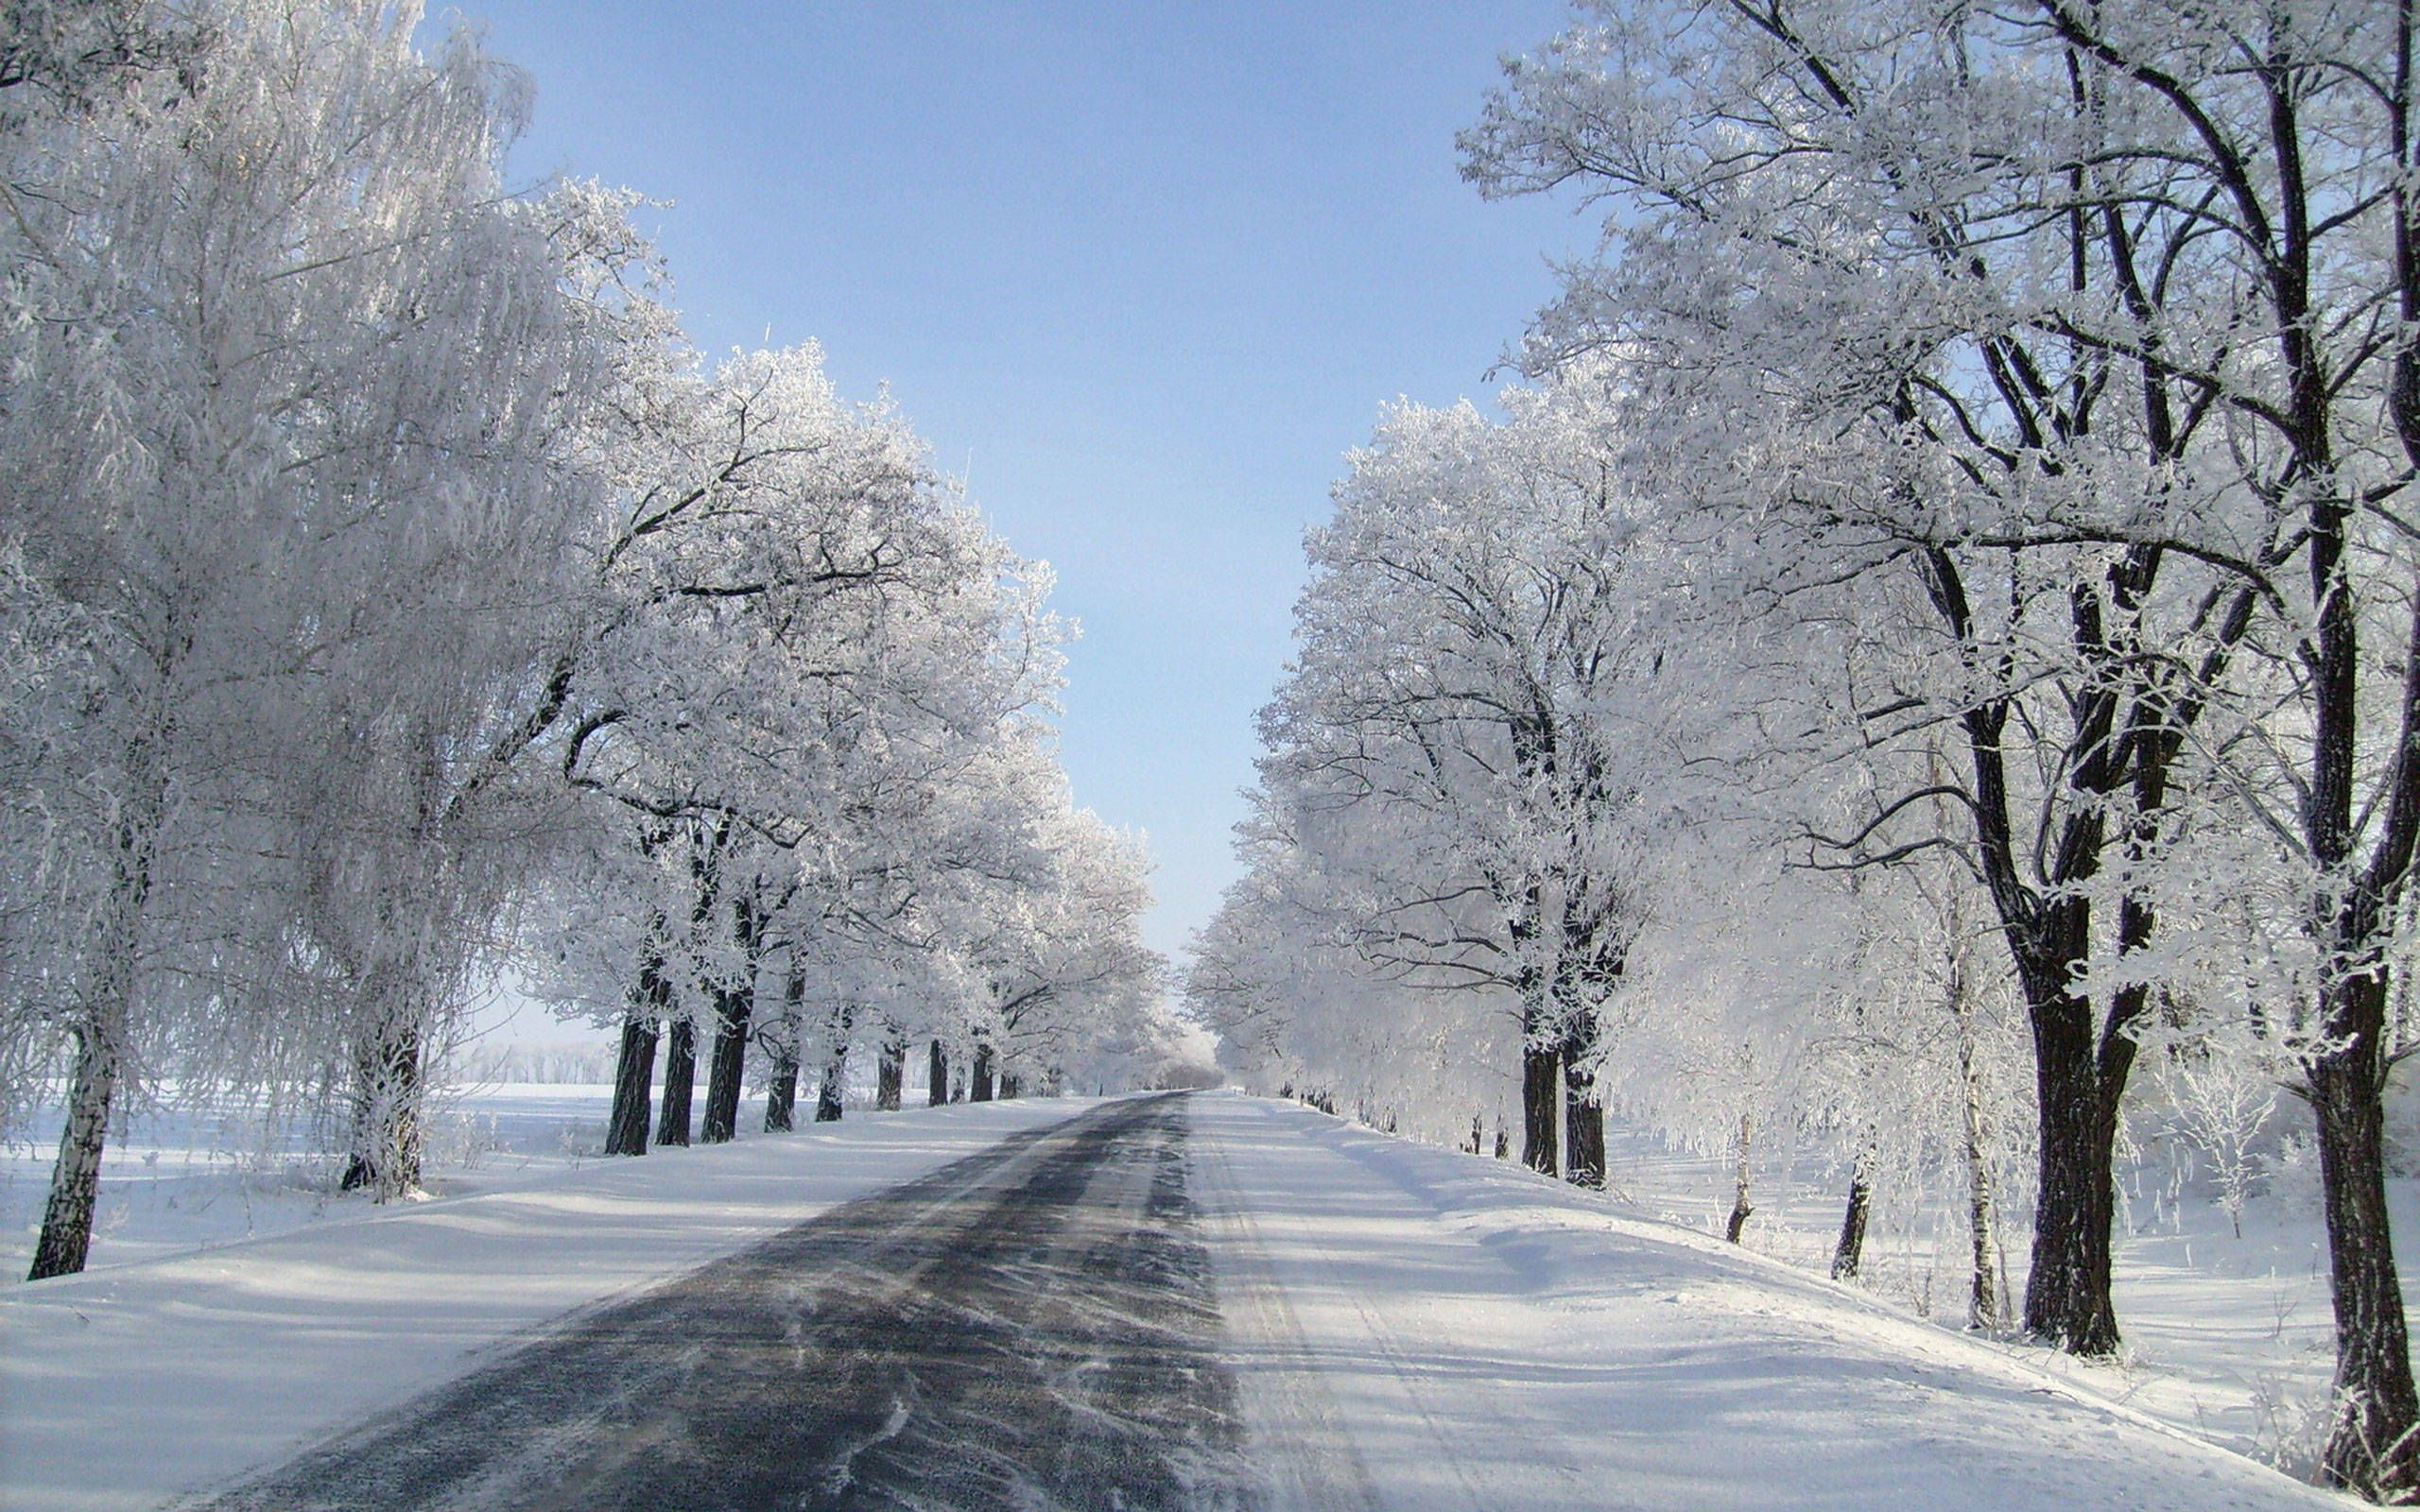 A snowy road lined with trees covered in snow. - Winter